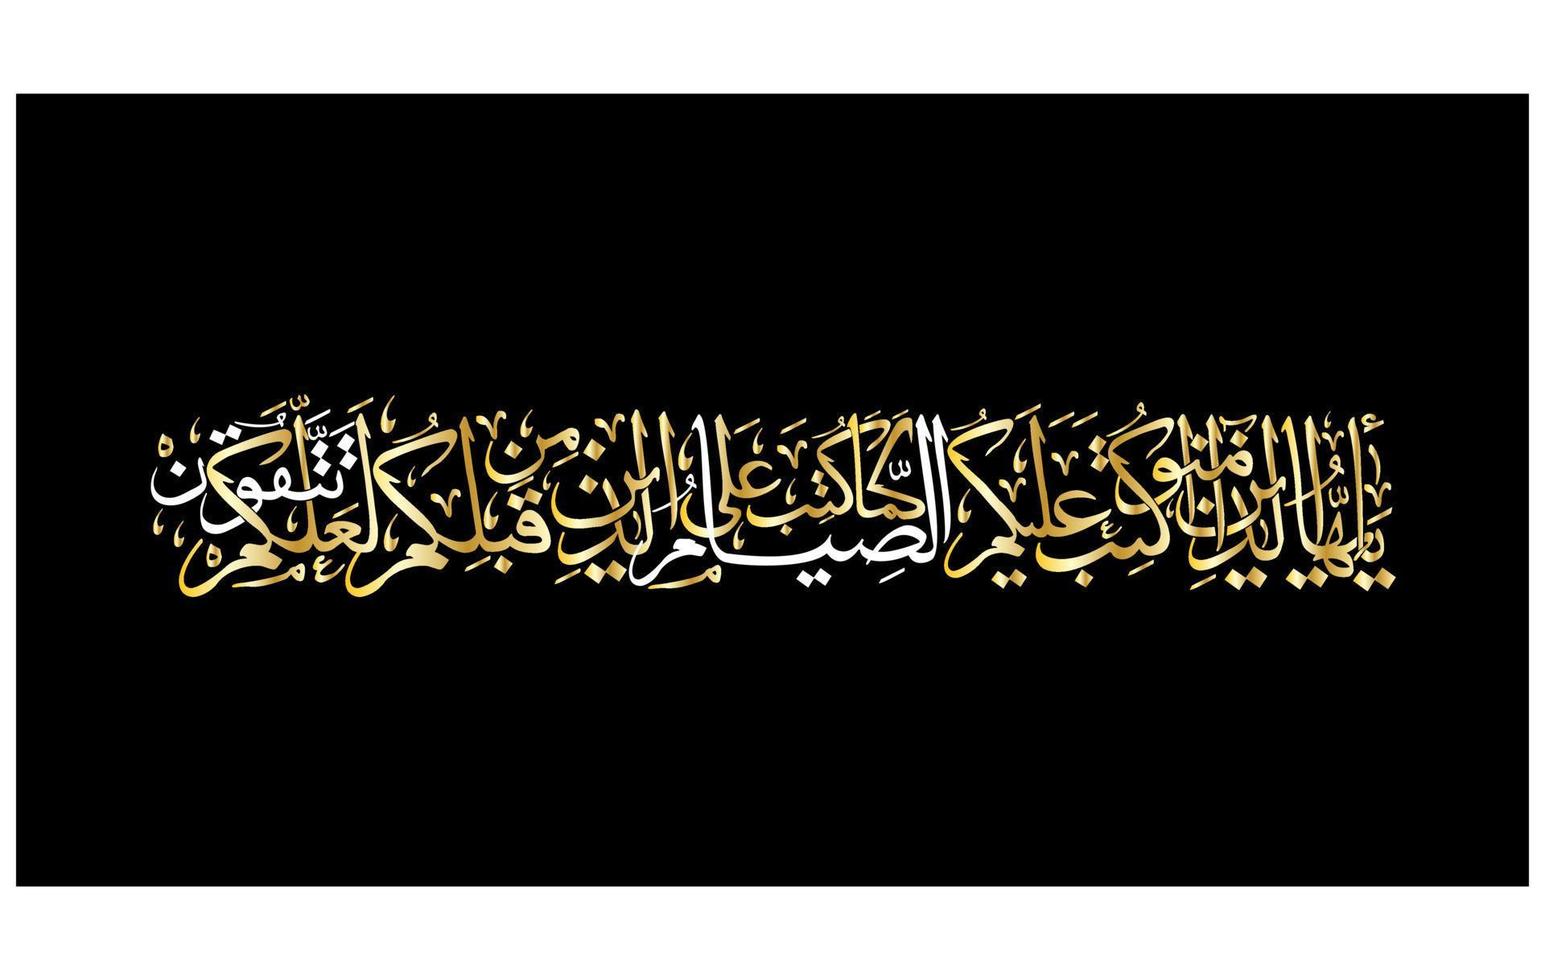 Arabic Calligraphy of Al Quran Sorah 02 Verse 183 on Fasting in The month of Ramadhan vector